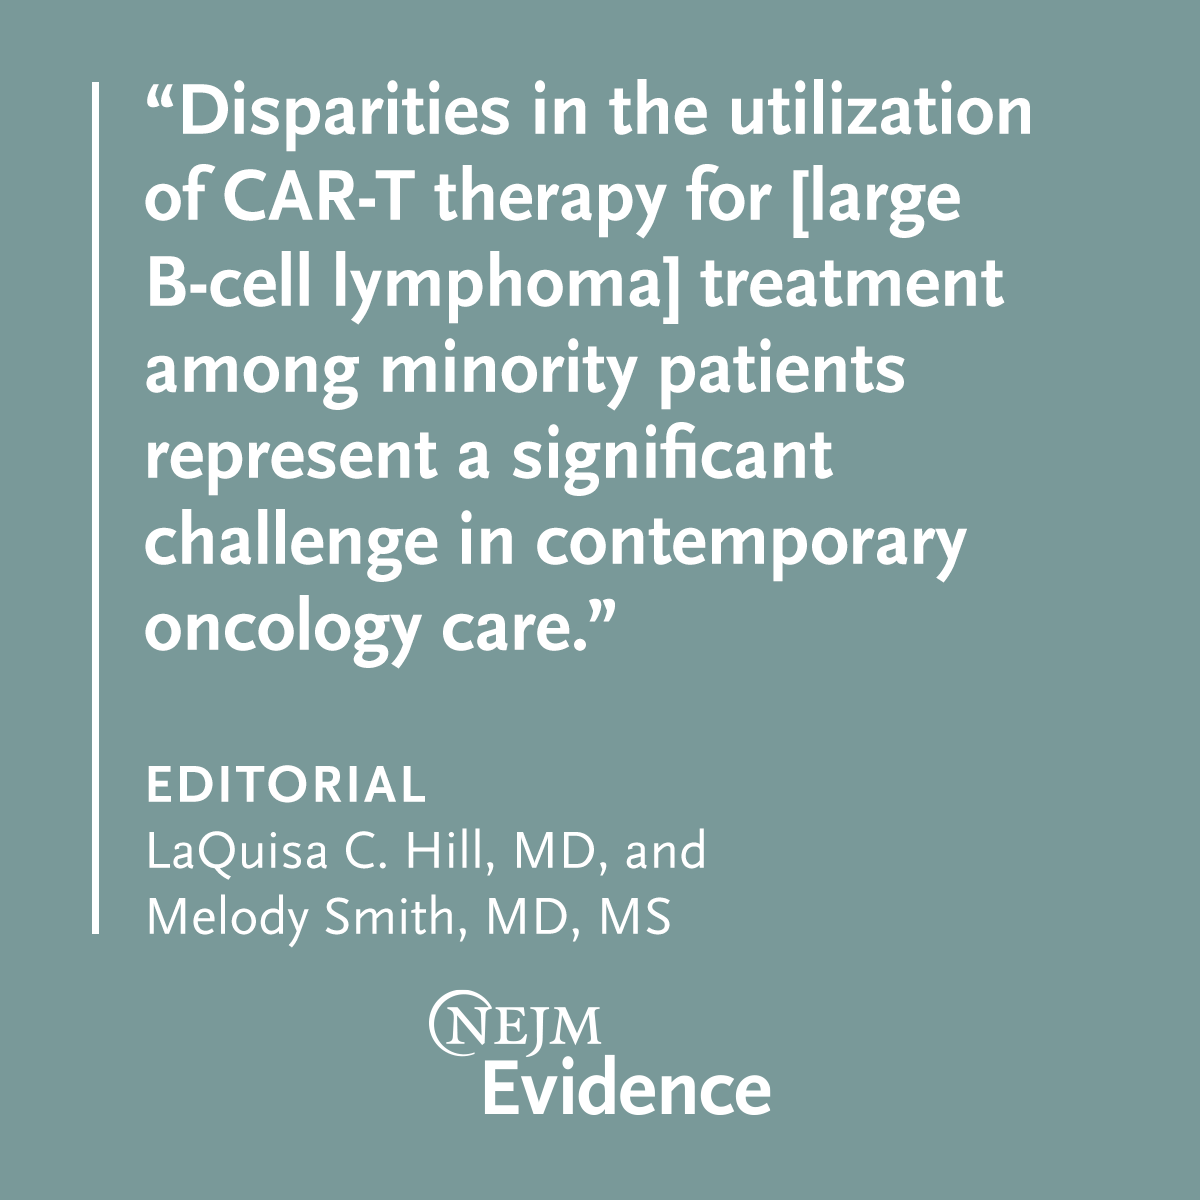 Editorial: “An Assessment of CAR-T Cell Therapy Utilization among Racial and Ethnic Minority Patients” by LaQuisa C. Hill, MD, and Melody Smith, MD, MS eviden.cc/3x2z1Nv